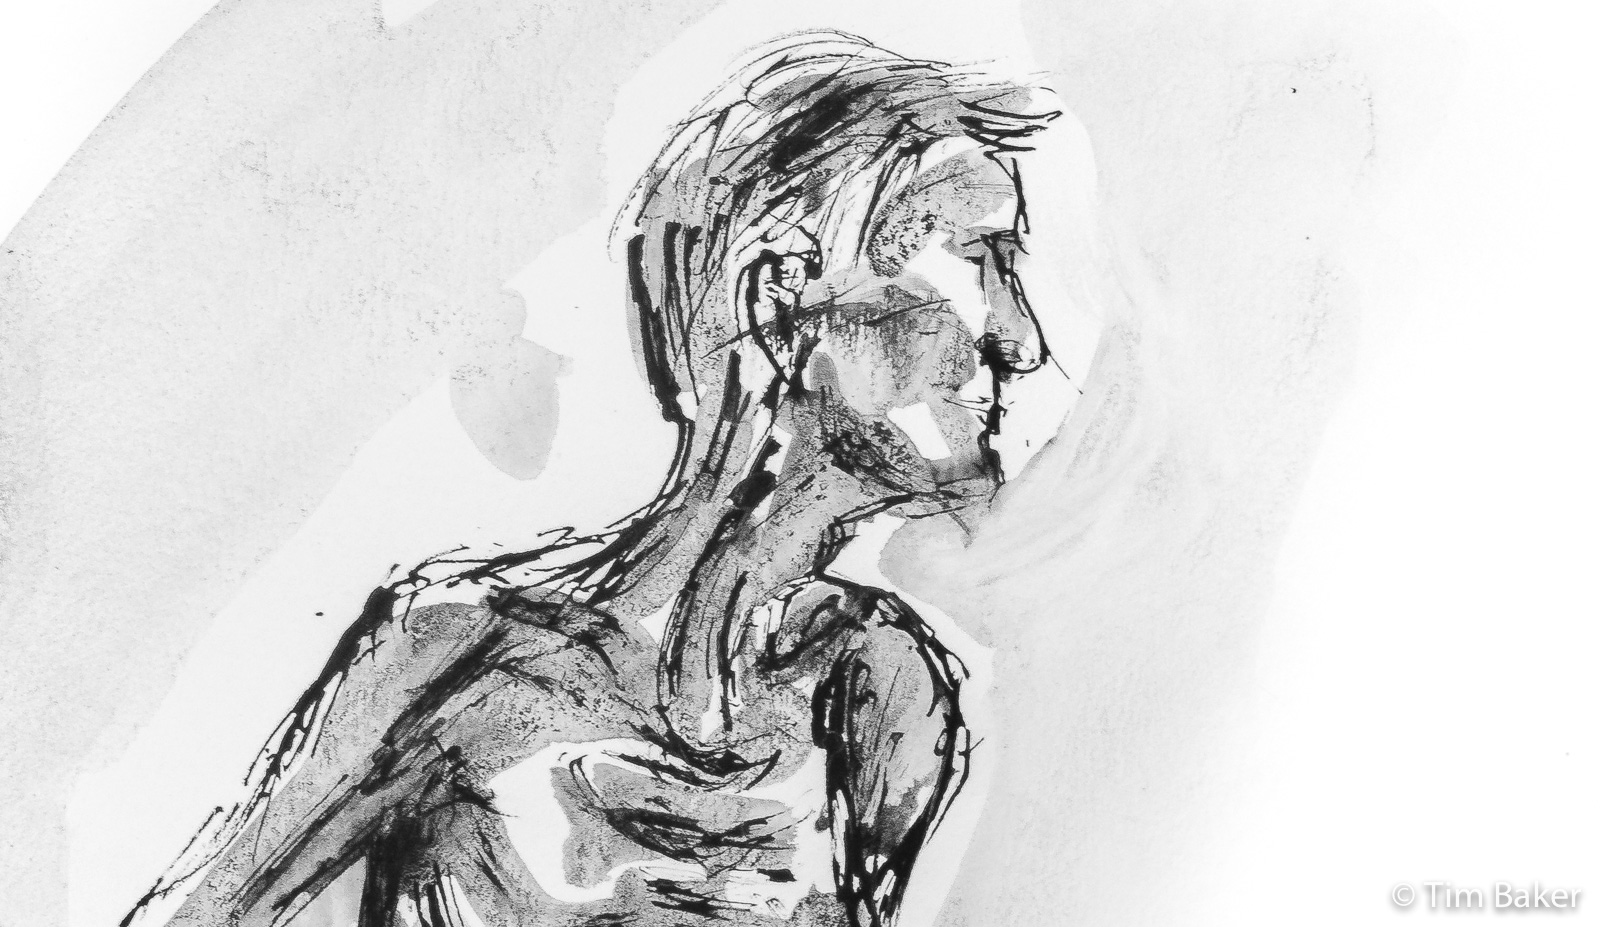 Life Drawing #46 - Hugh, Quill drawing with brush and ink, A3 (detail)